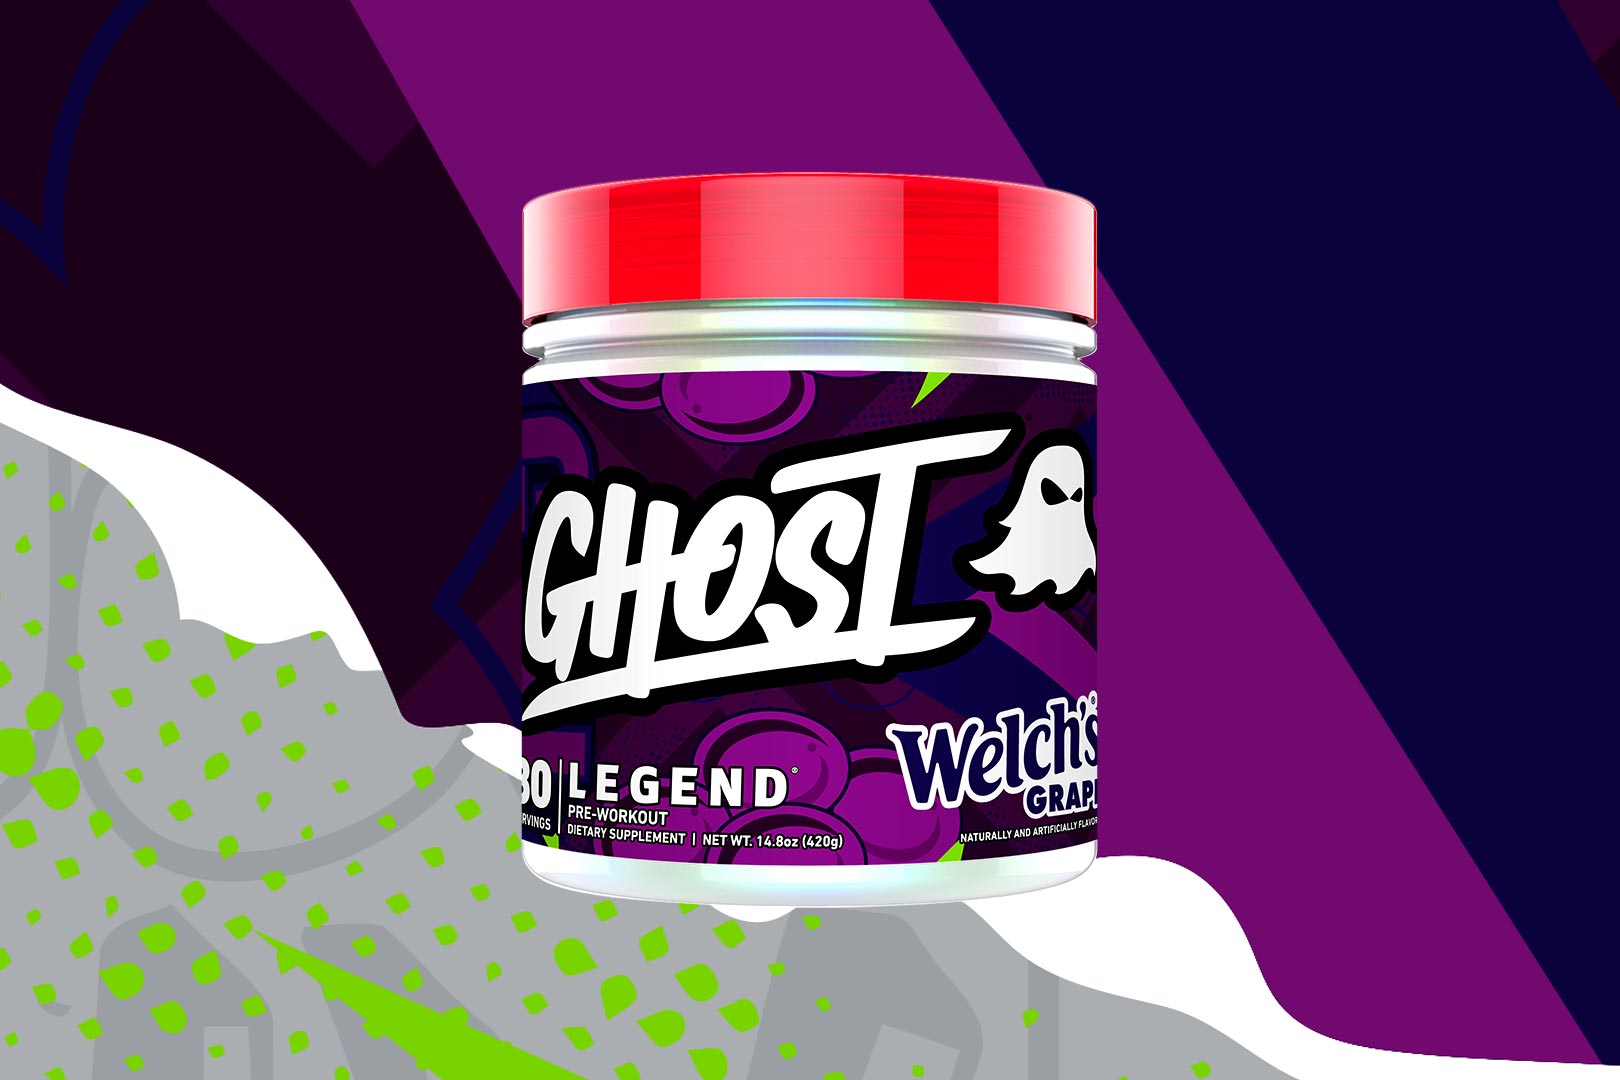 Welches Grape Returns To Ghost Legend